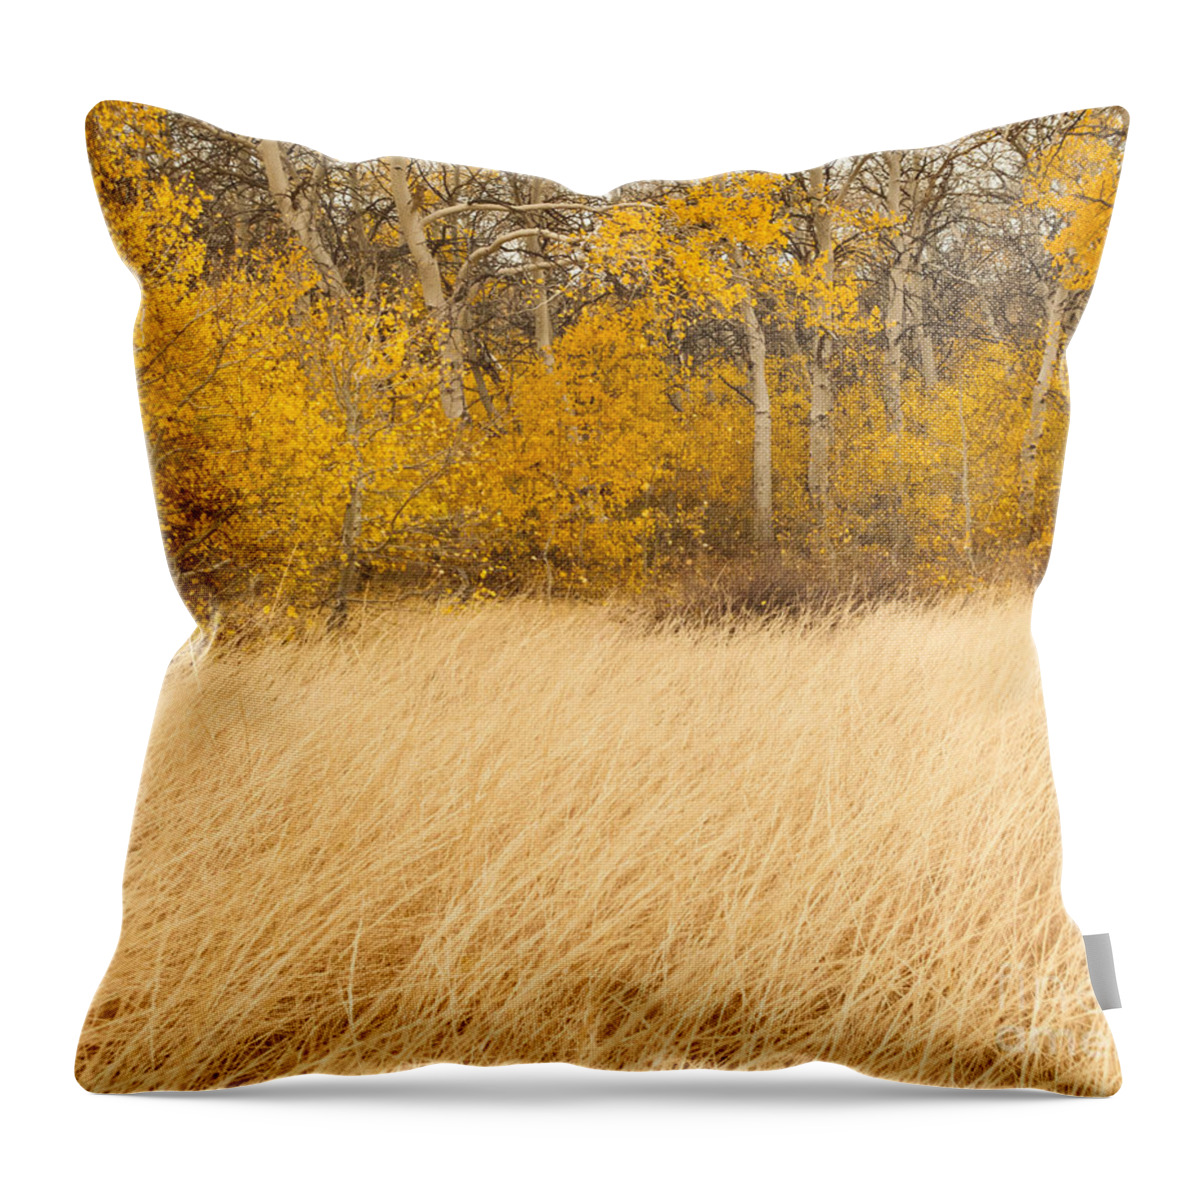 Aspen Trees Throw Pillow featuring the photograph Aspen and Grass by L J Oakes